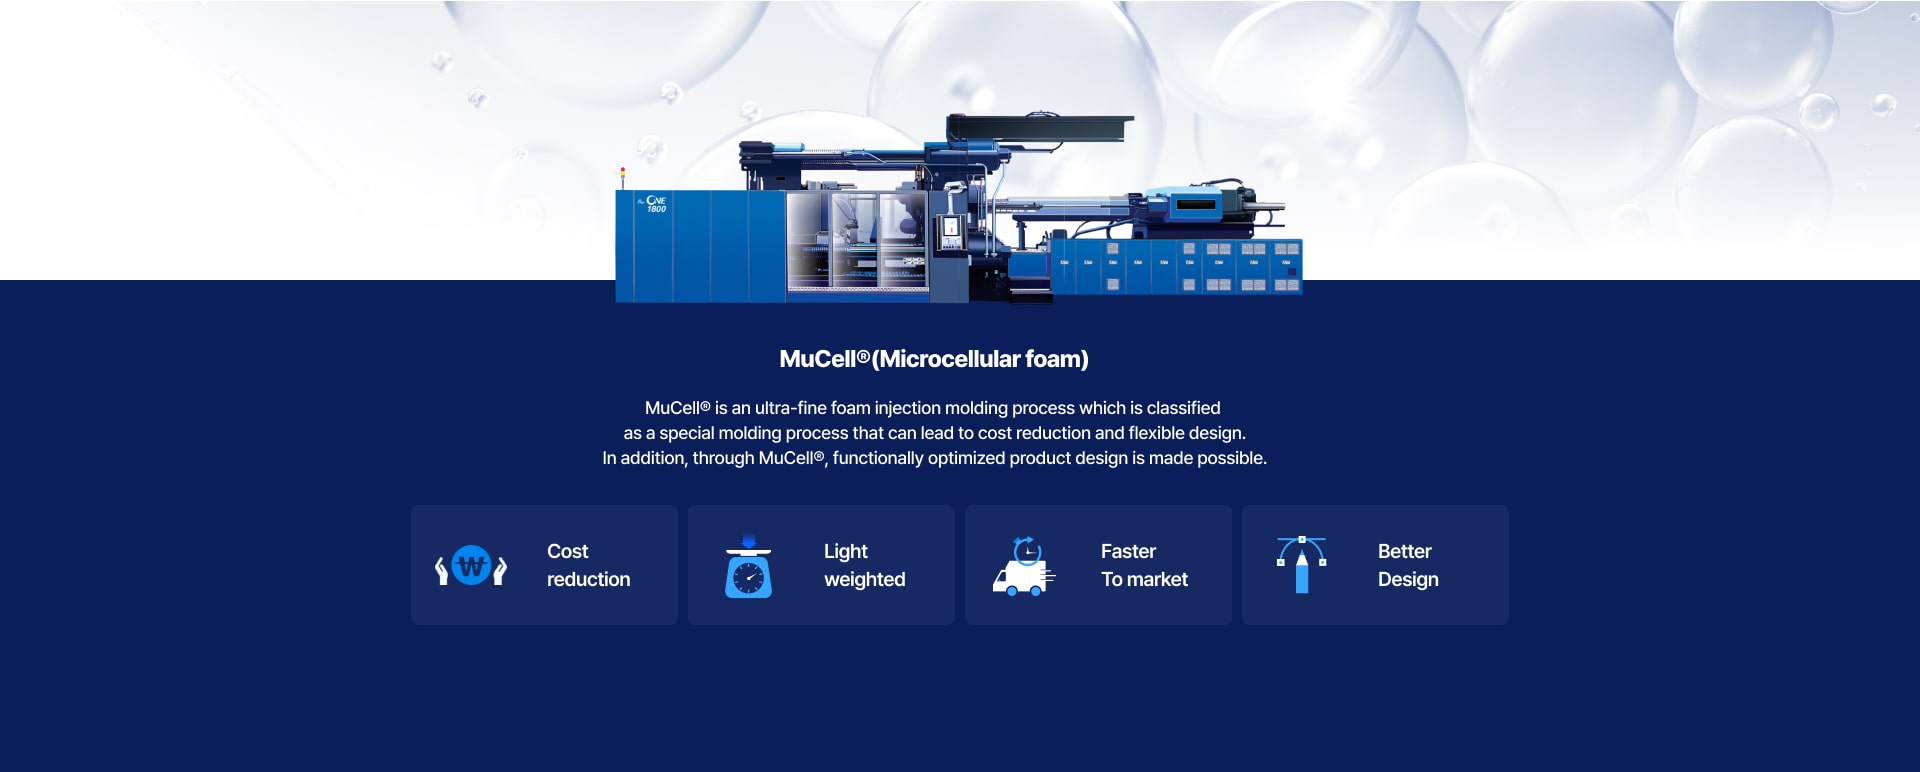 MuCell® is an ultra-fine foam injection molding process which is classified as a special molding process that can lead to cost reduction and flexible design. In addition, through MuCell®, functionally optimized product design is made possible. Cost reduction/Light weighted/Faster to market/Better Design